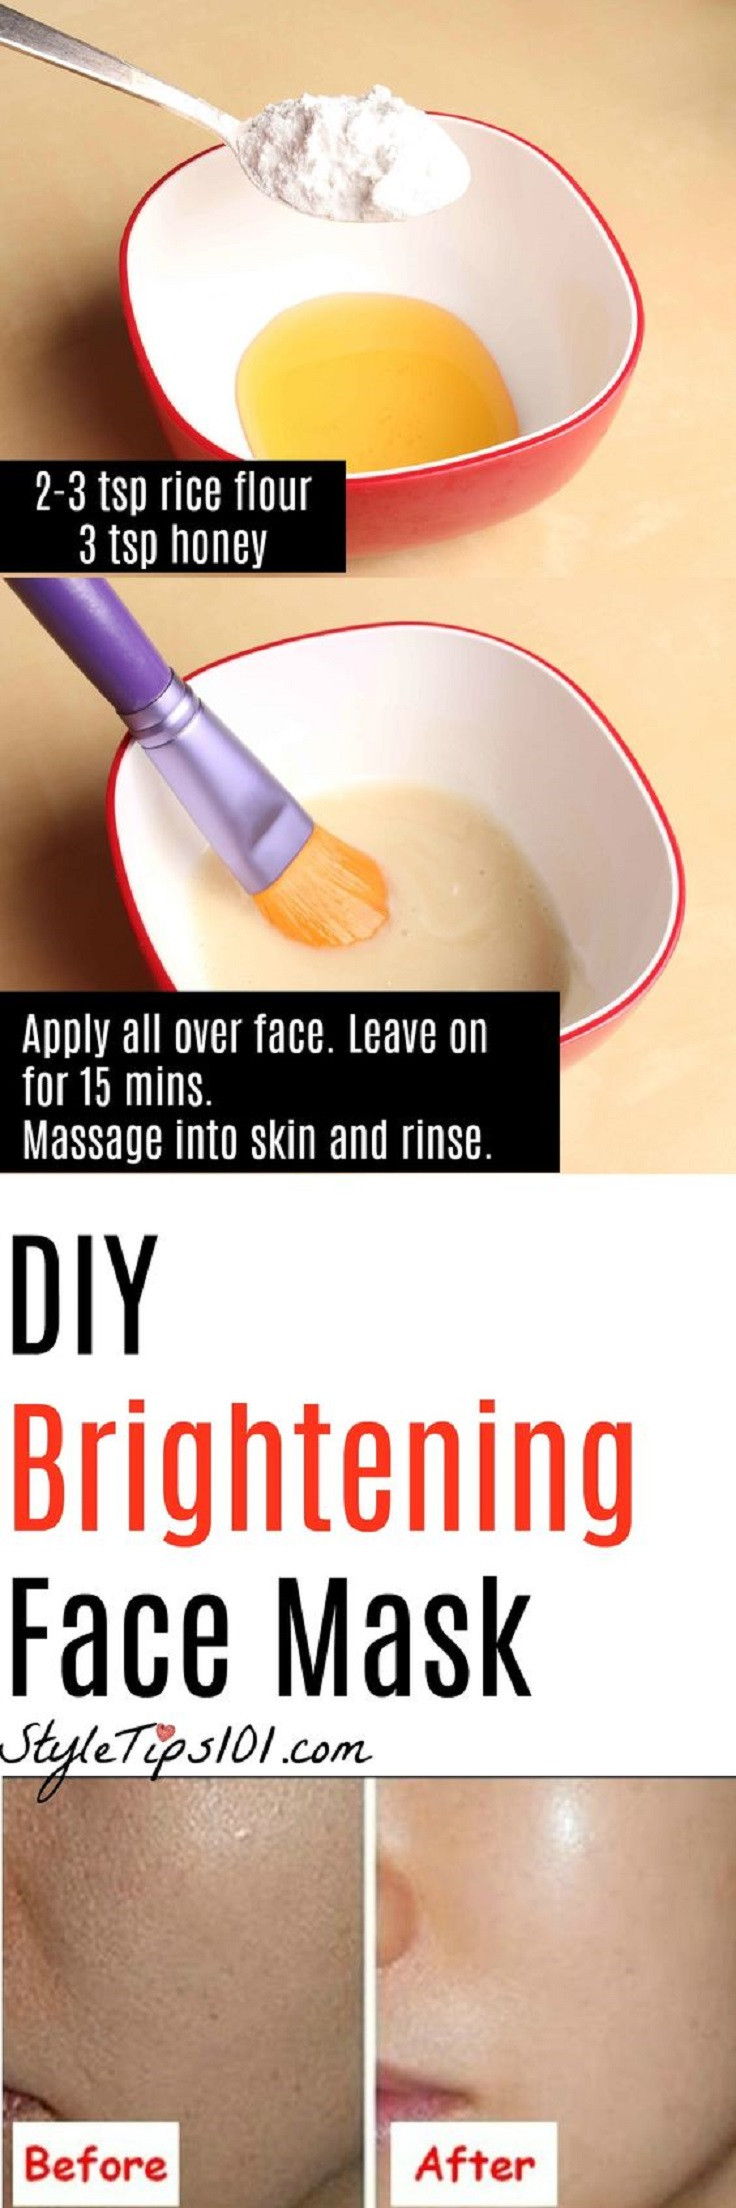 Skin Brightening Mask DIY
 16 Re mended Skin Care Routine Tips and DIYs for A